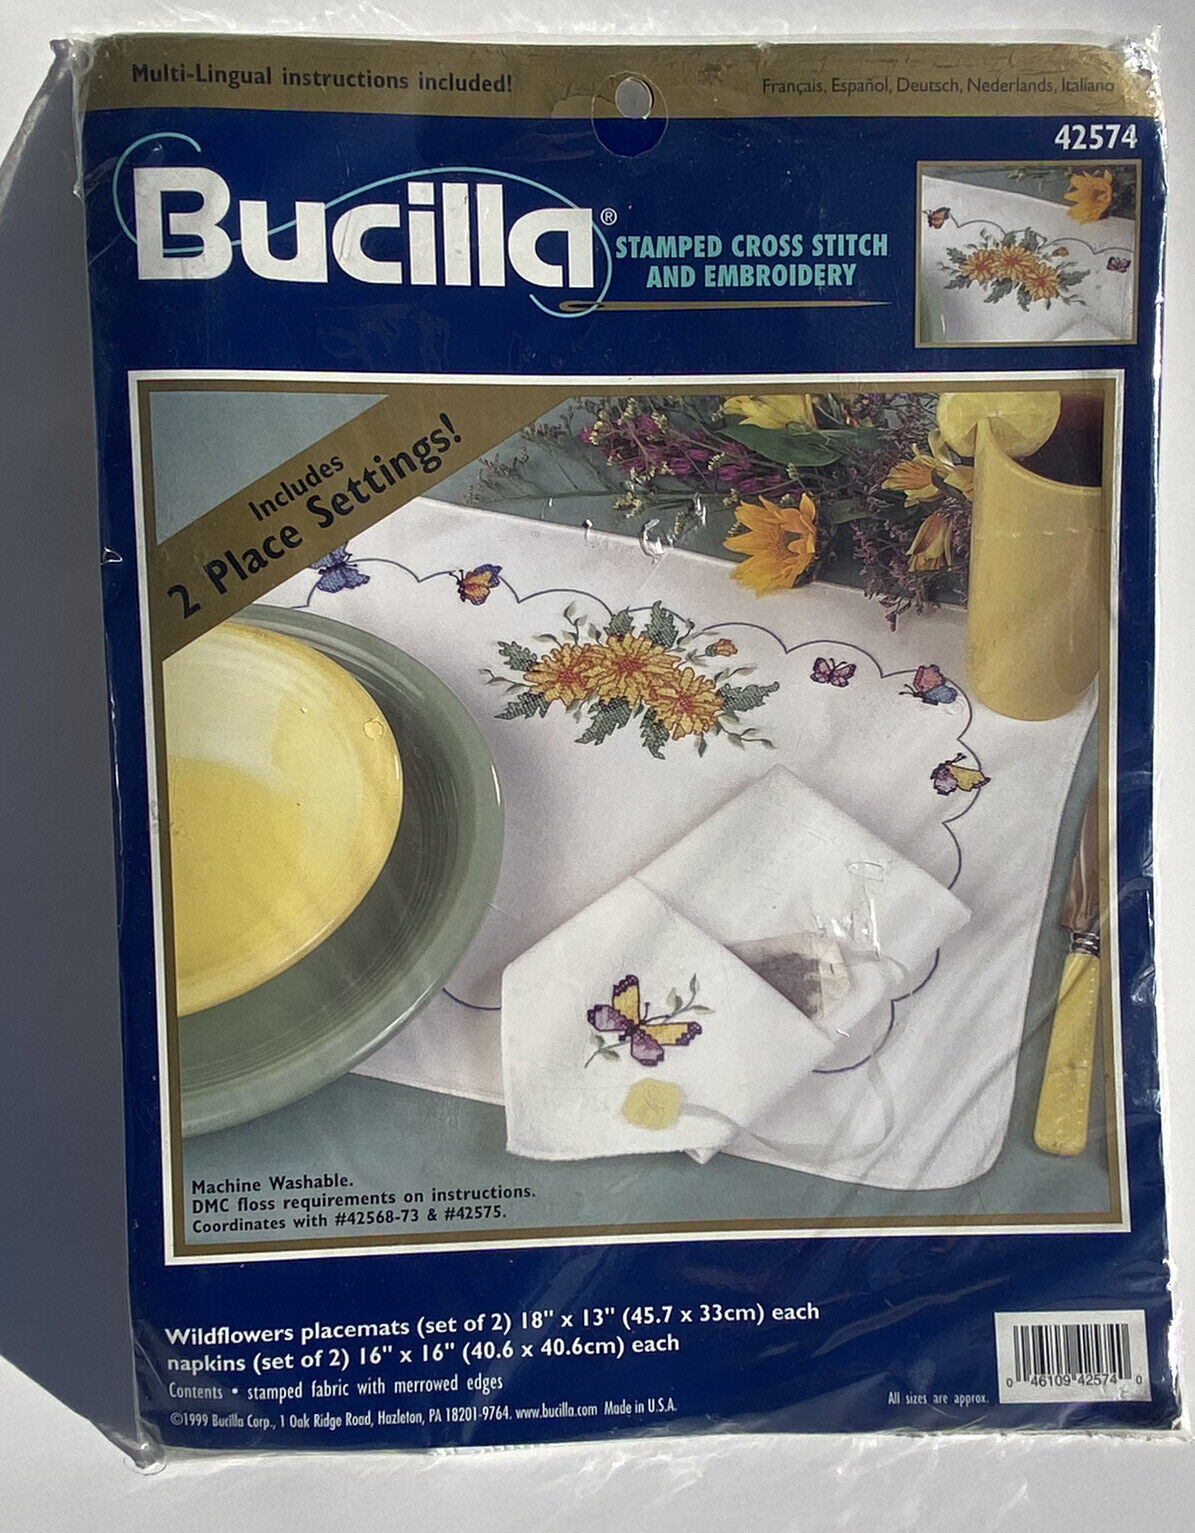 Bucilla Stamped Cross Stitch & Embroidery Wildflowers Placemats & Napkins 42574